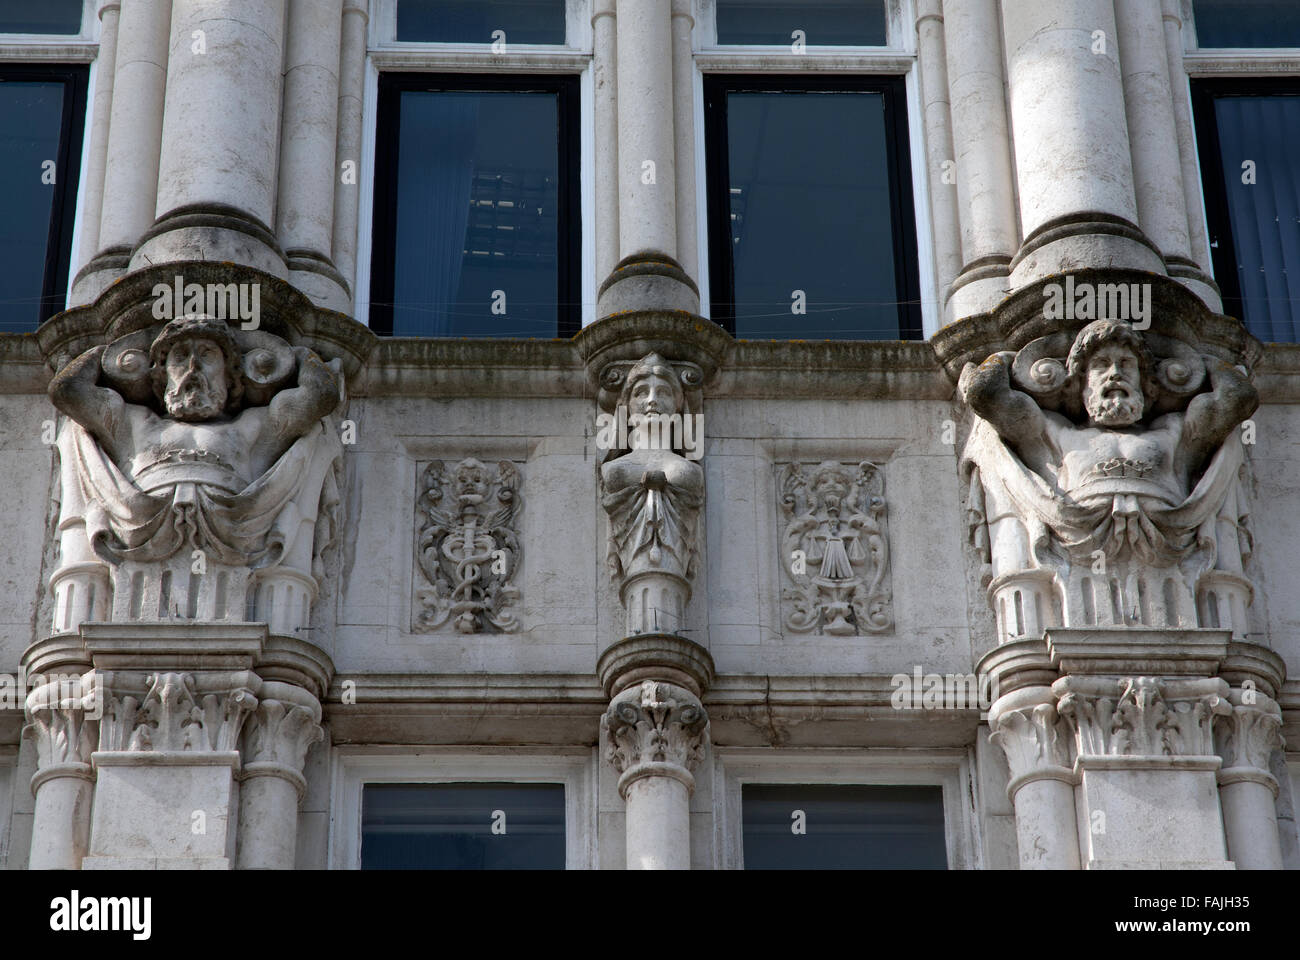 Architectural detail of the Lloyds Bank Building Cardiff, Wales UK Stock Photo